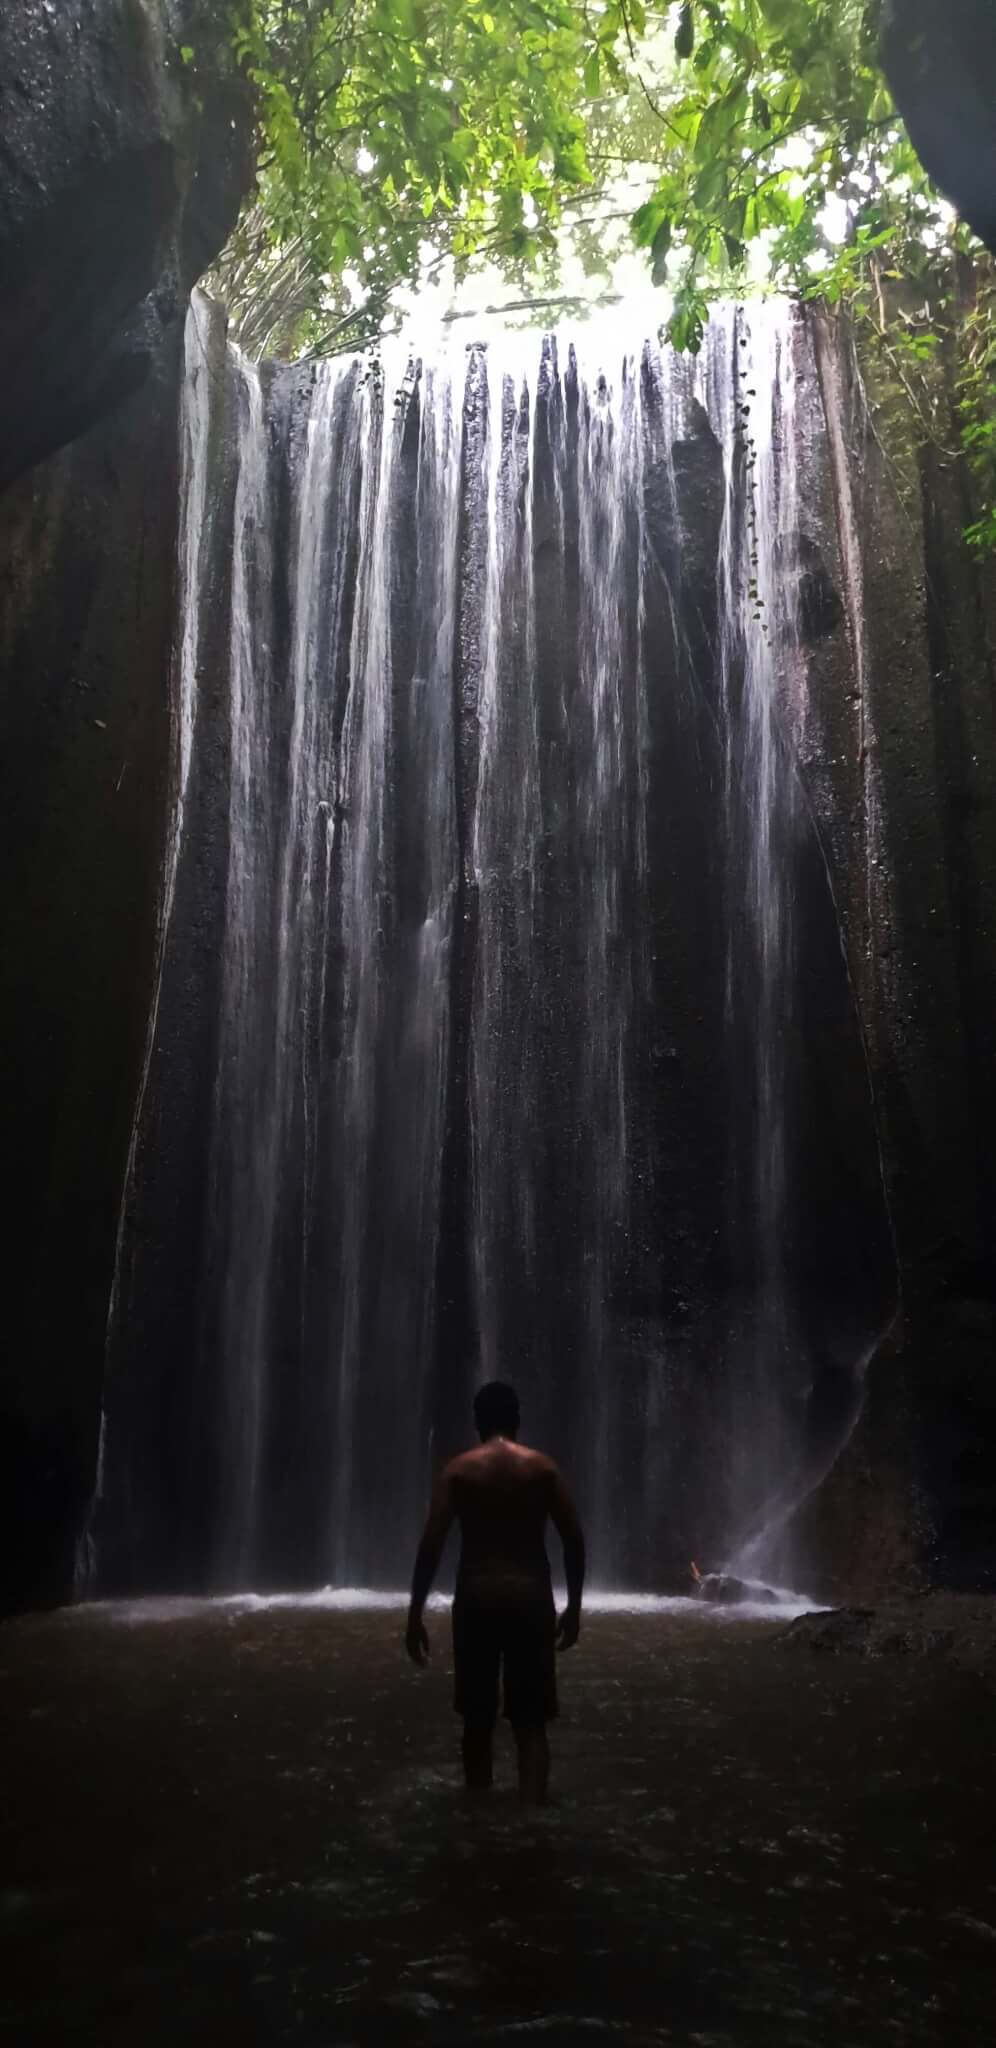 Me trying to get to the base of the Tukad Cepung waterfall, which was a last minute inclusion in our Ubud itinerary